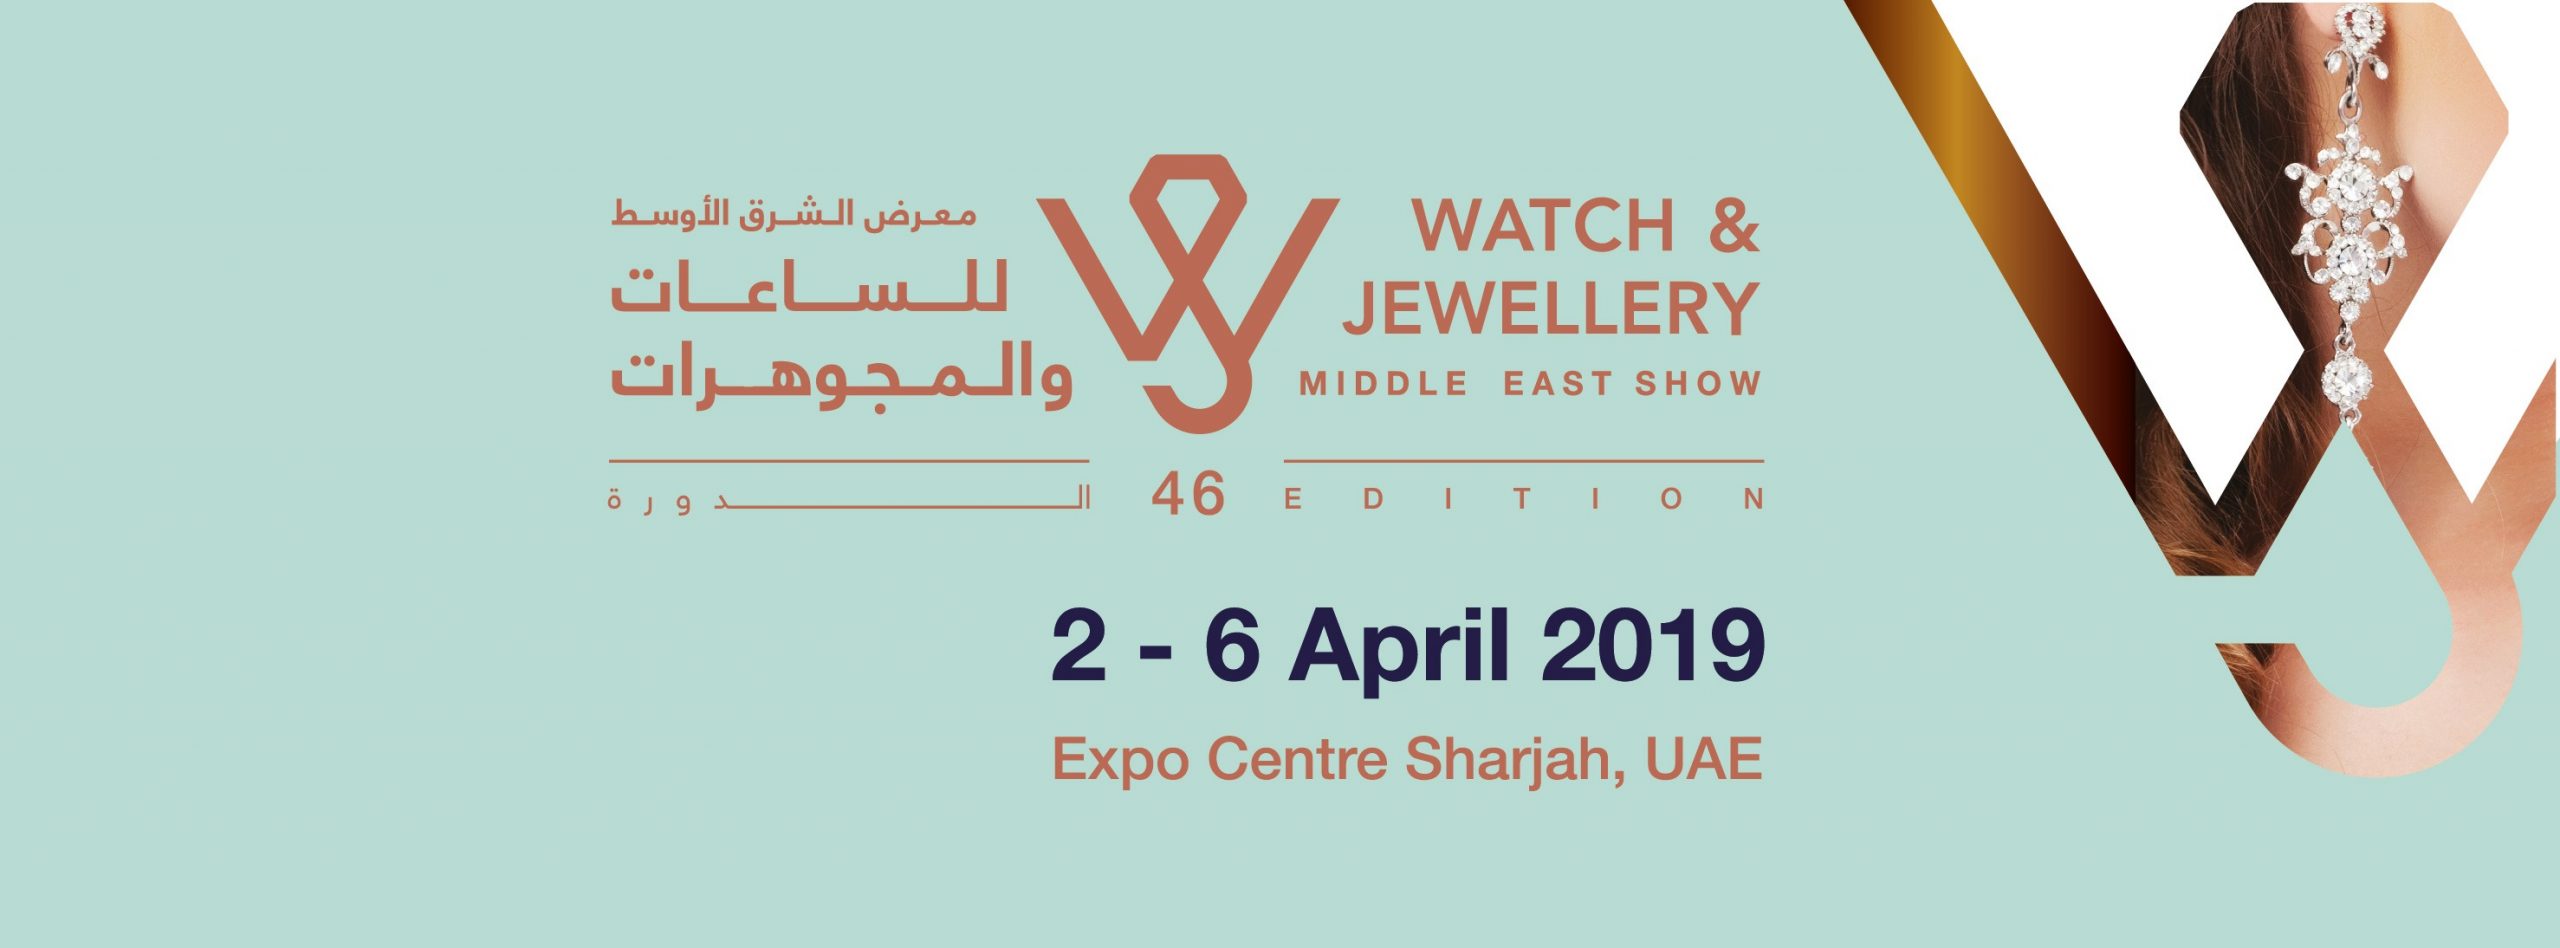 Watch & Jewellery Middle East Show 2019 - Coming Soon in UAE